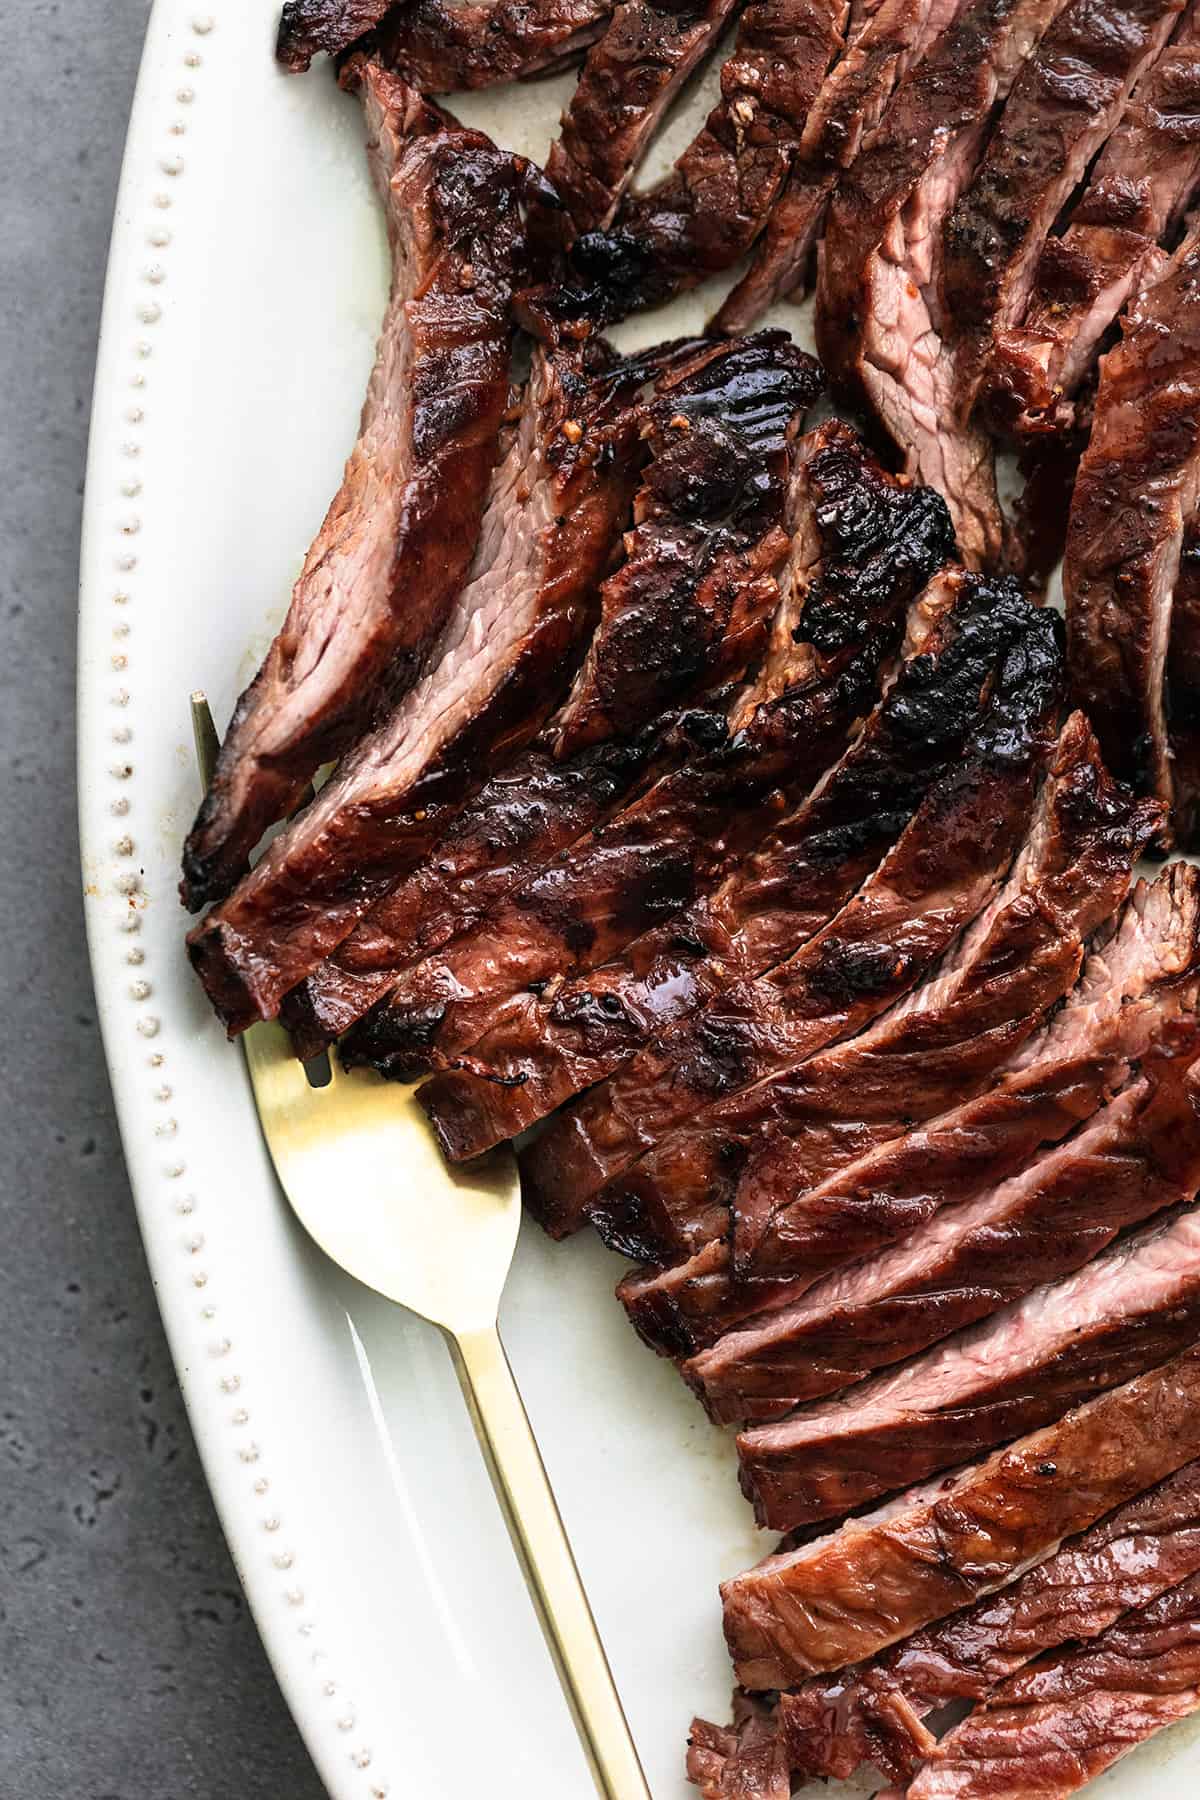 Steakhouse-Style Grilled Marinated Flank Steak Recipe